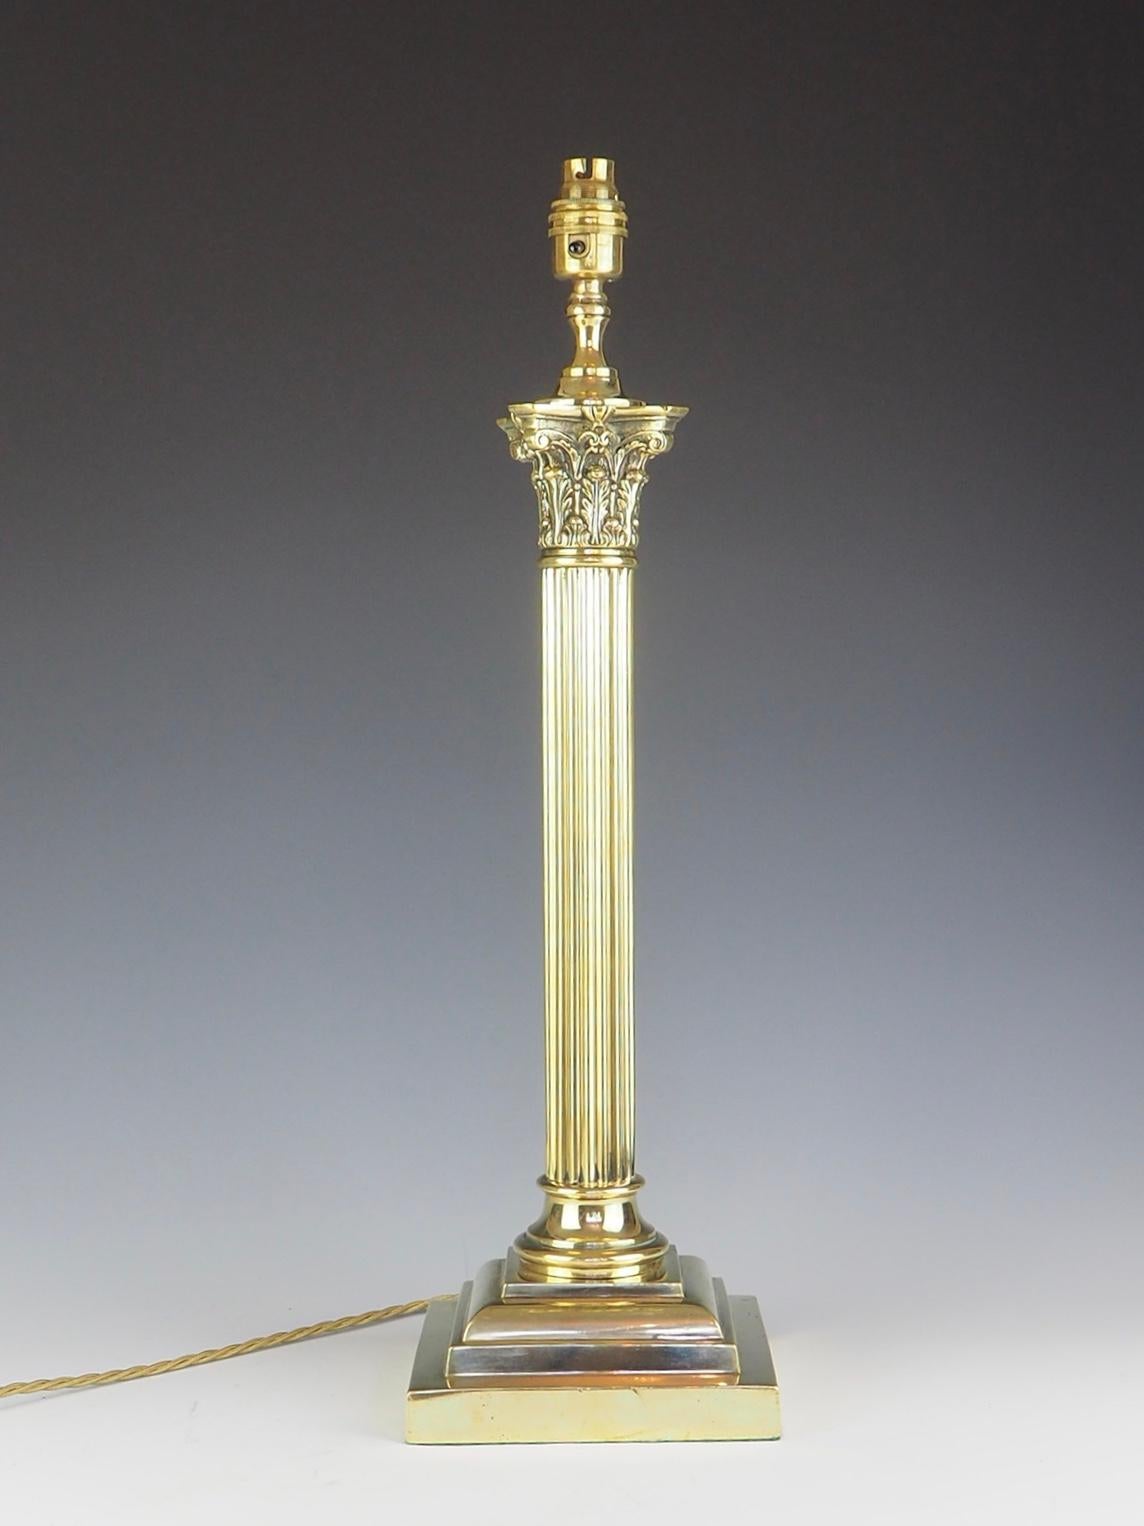 This is a splendid antique Victorian brass columnar Corinthian table lamp, now converted to electricity from oil lamps, late 19th Century in date.

This opulent antique table lamp feature Kingly Corinthian Capital decorated with classical ornate